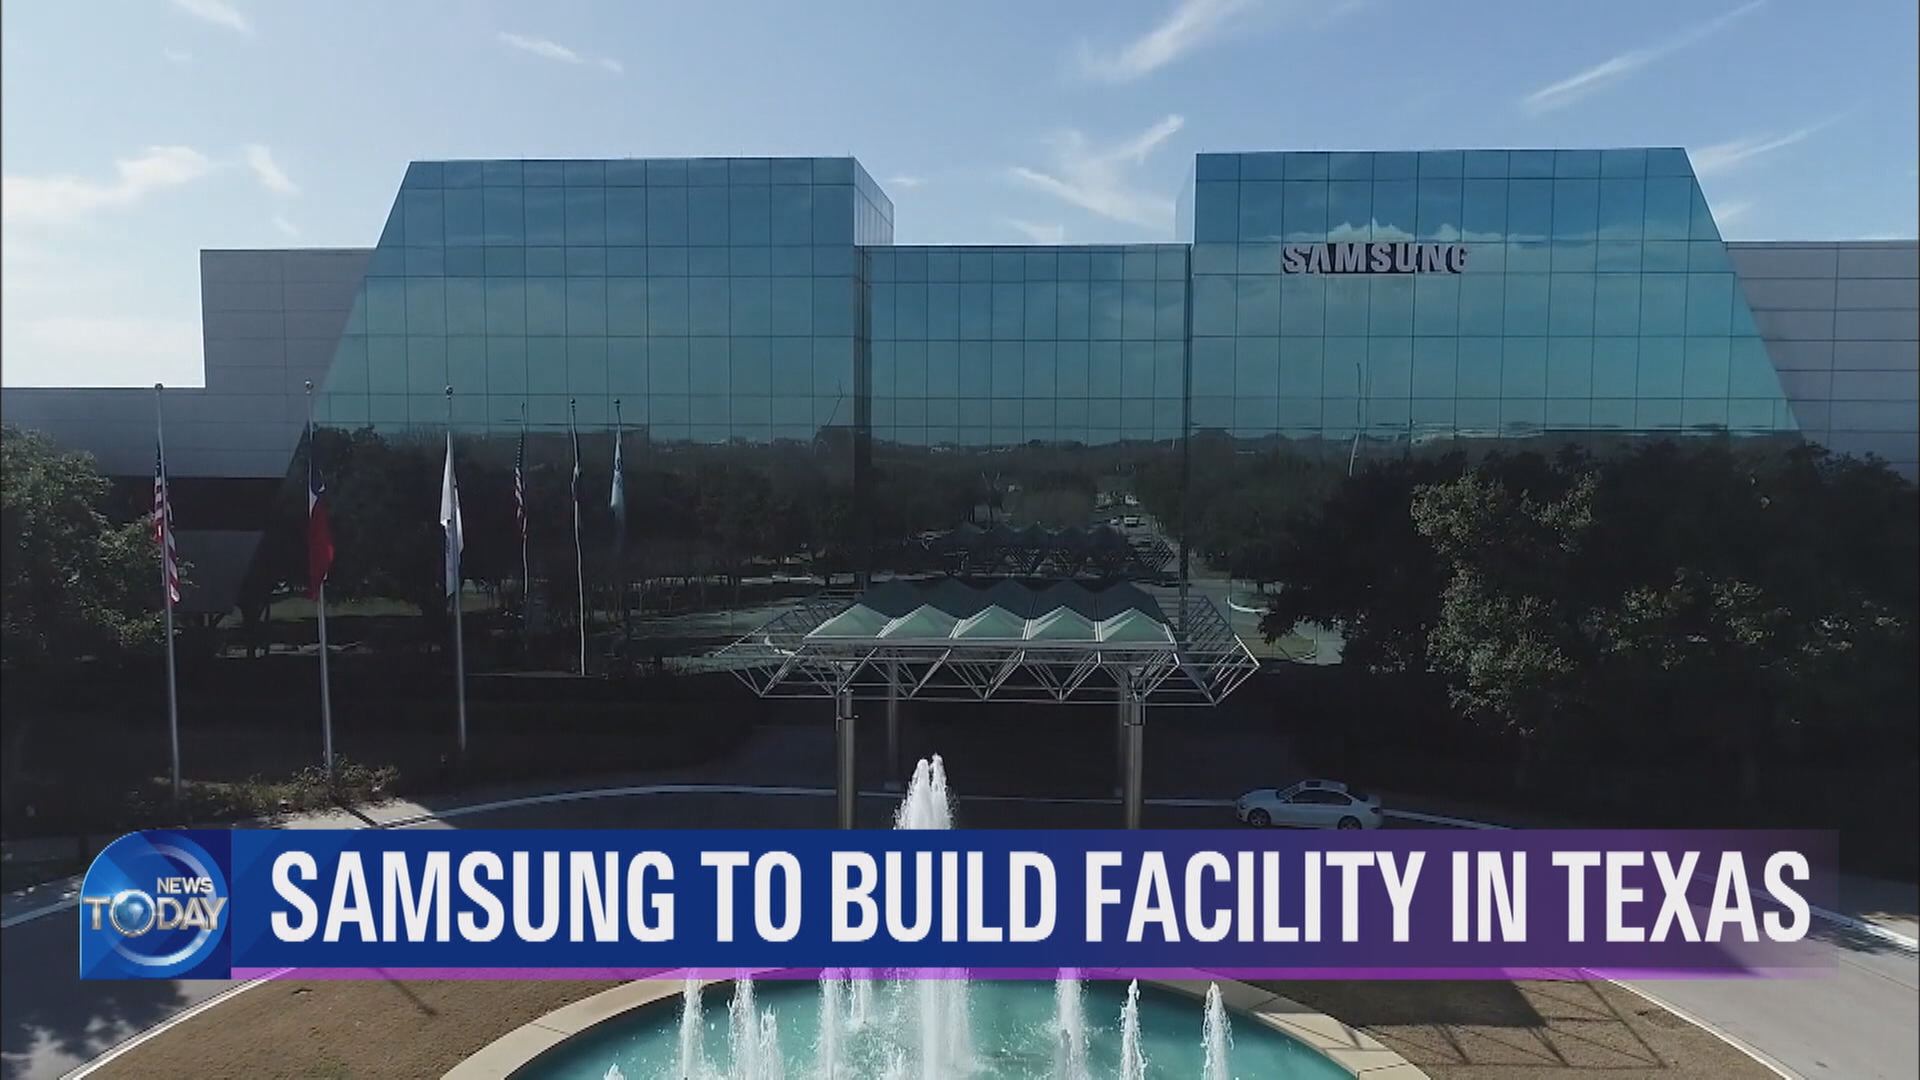 SAMSUNG TO BUILD FACILITY IN TEXAS